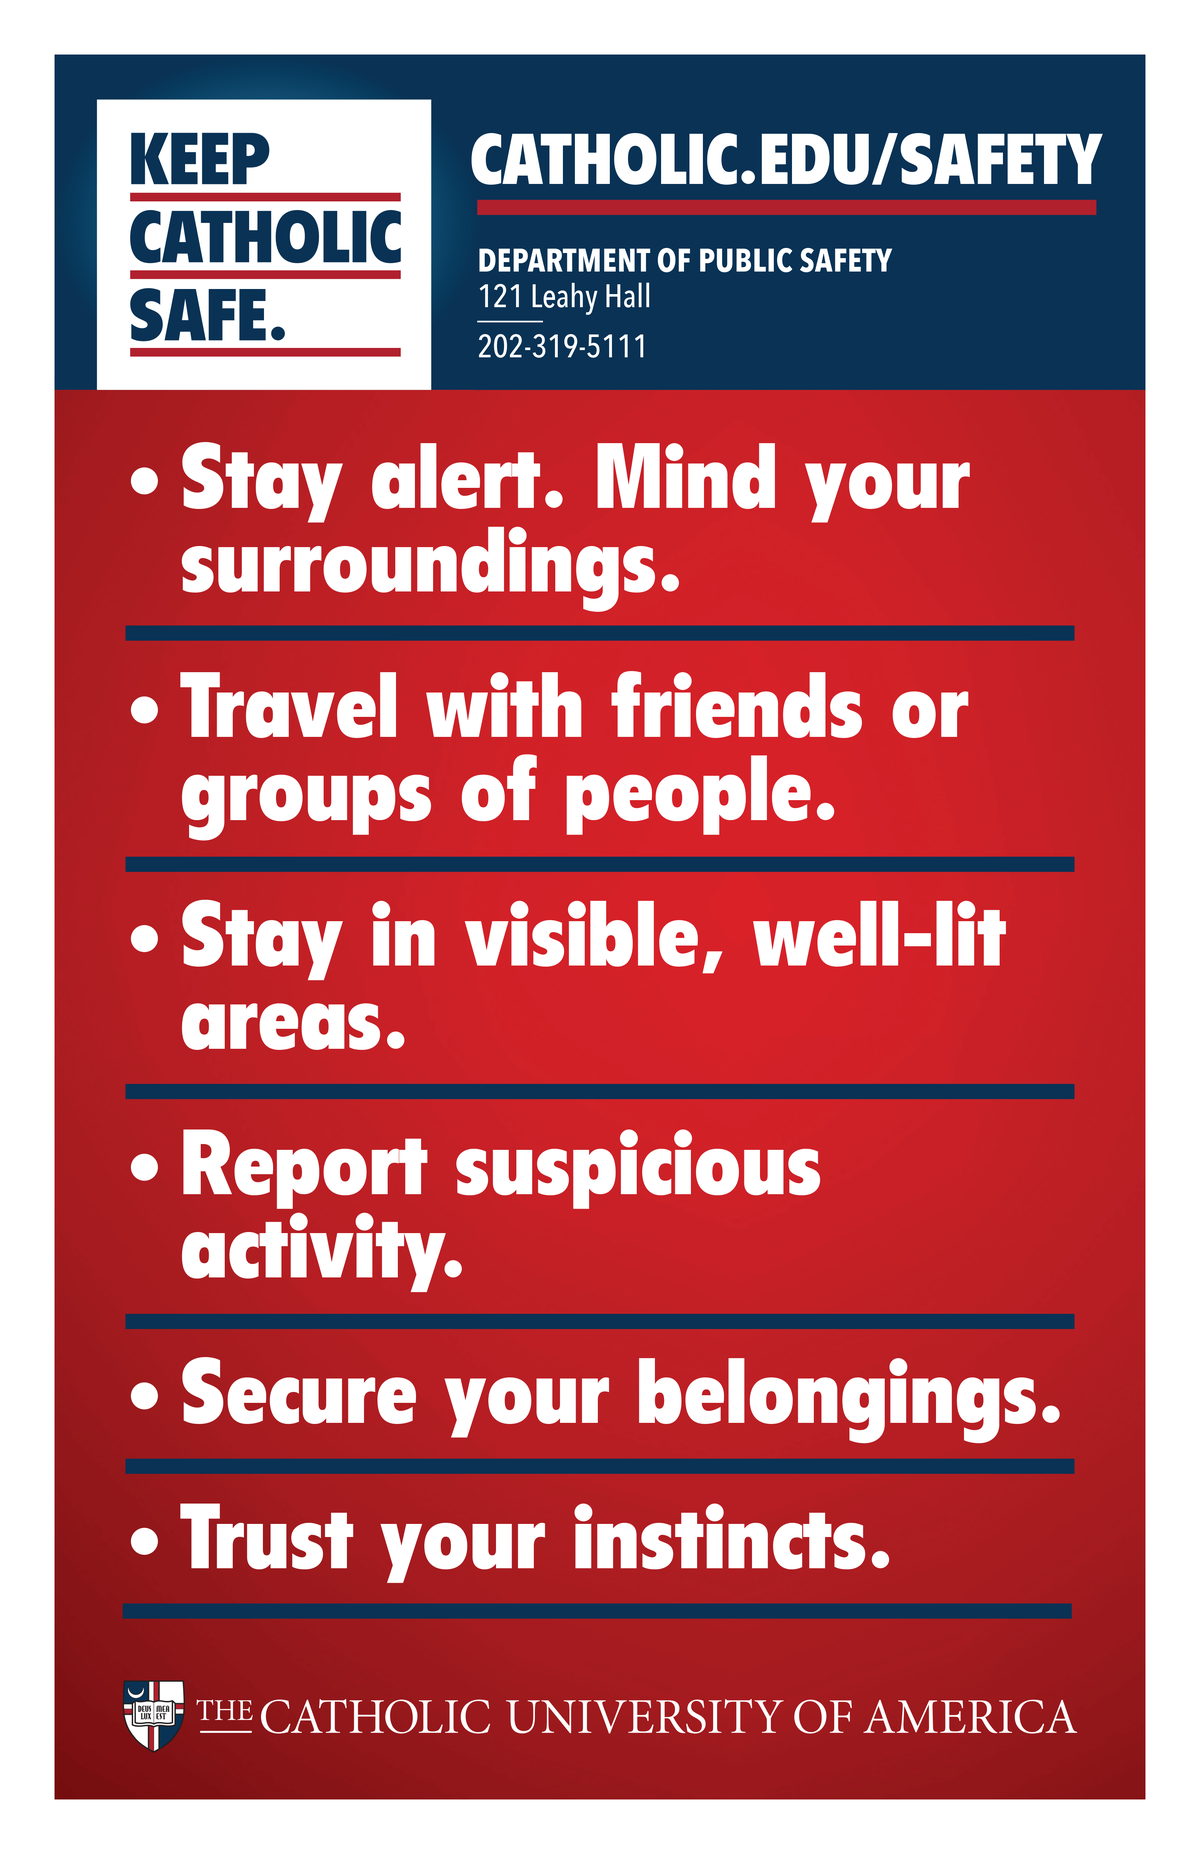 graphic containing safety tips